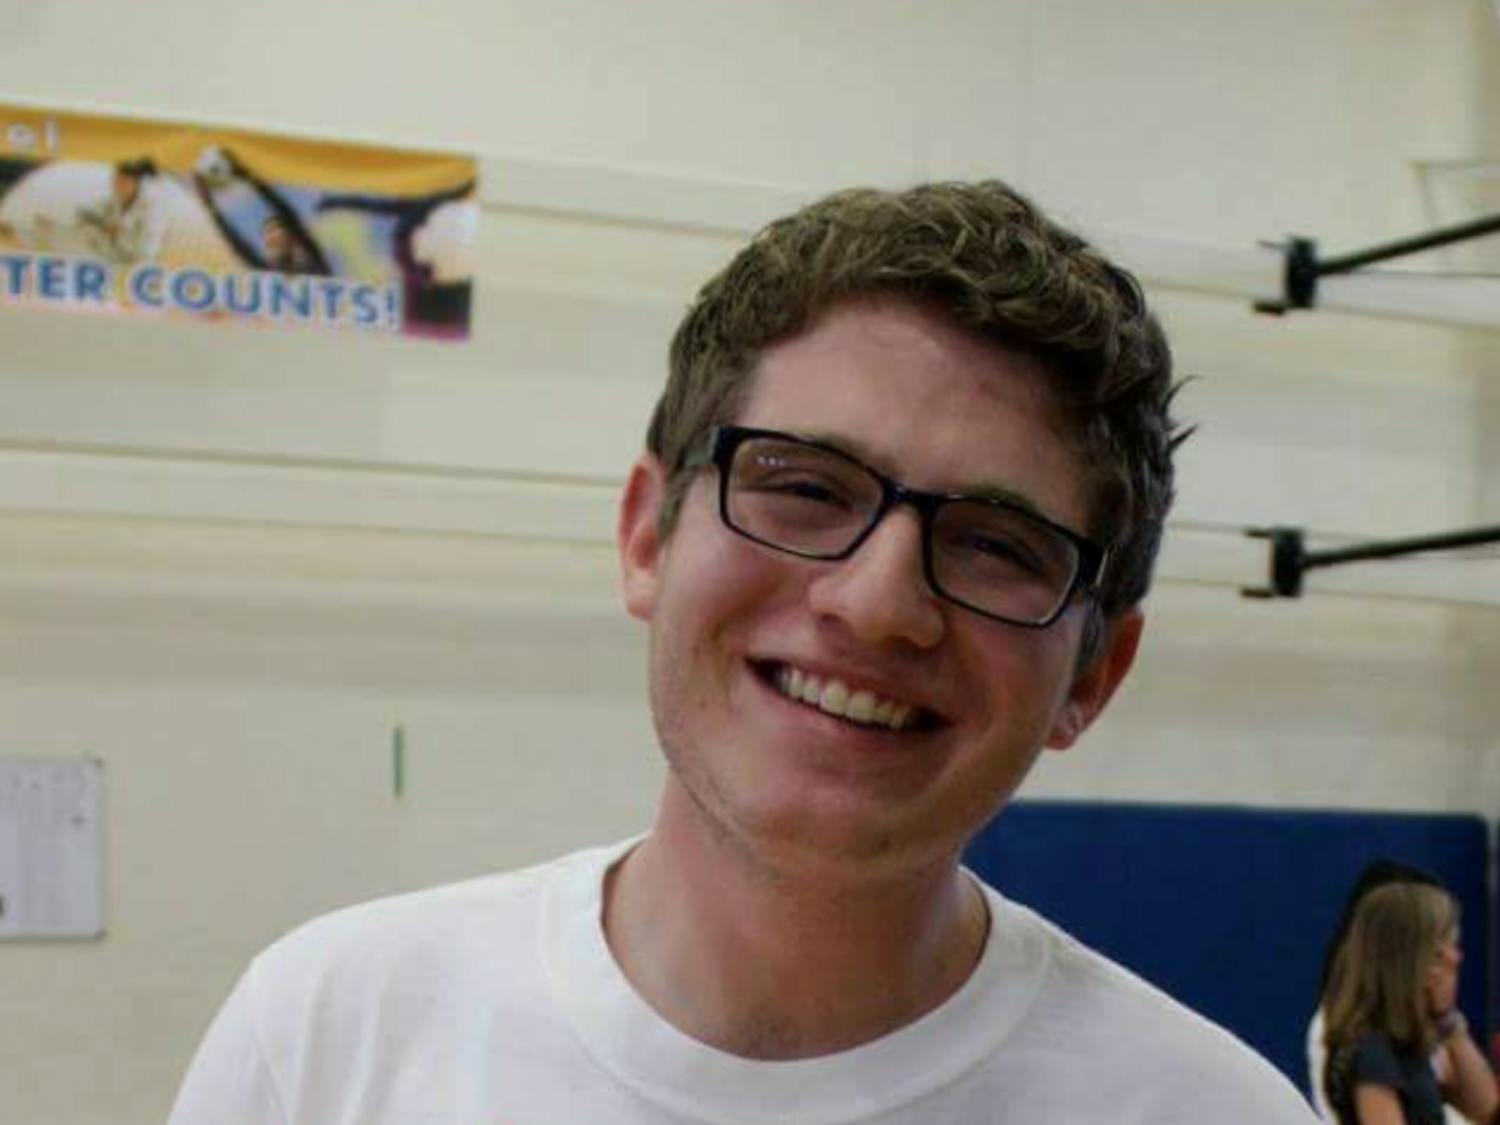 Sophomore&nbsp;Matthew Kaplan started the&nbsp;Be ONE Project to combat bullying in middle schools.&nbsp;